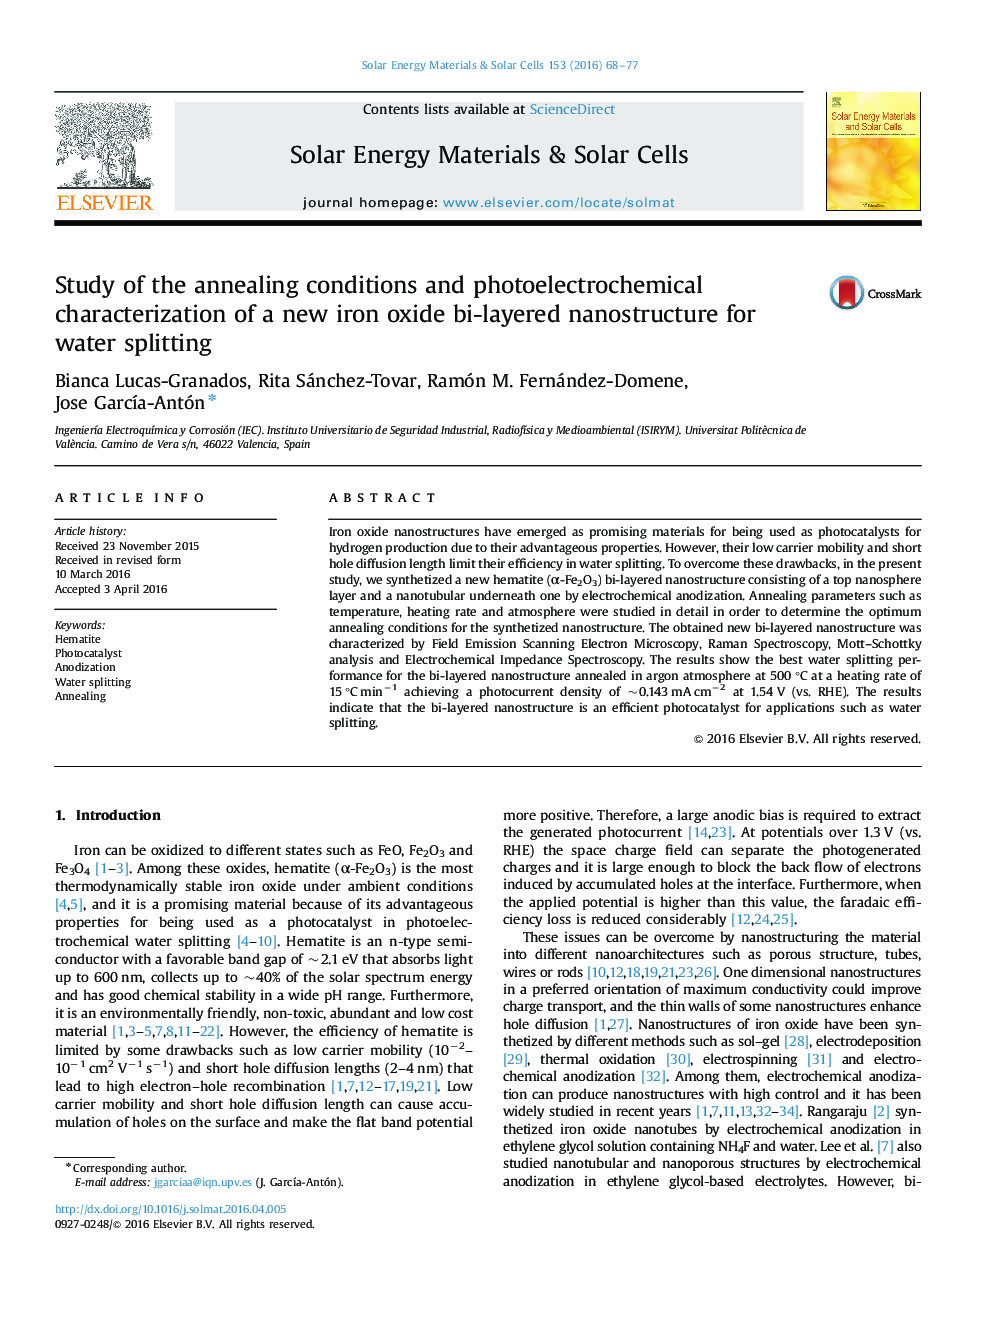 Study of the annealing conditions and photoelectrochemical characterization of a new iron oxide bi-layered nanostructure for water splitting